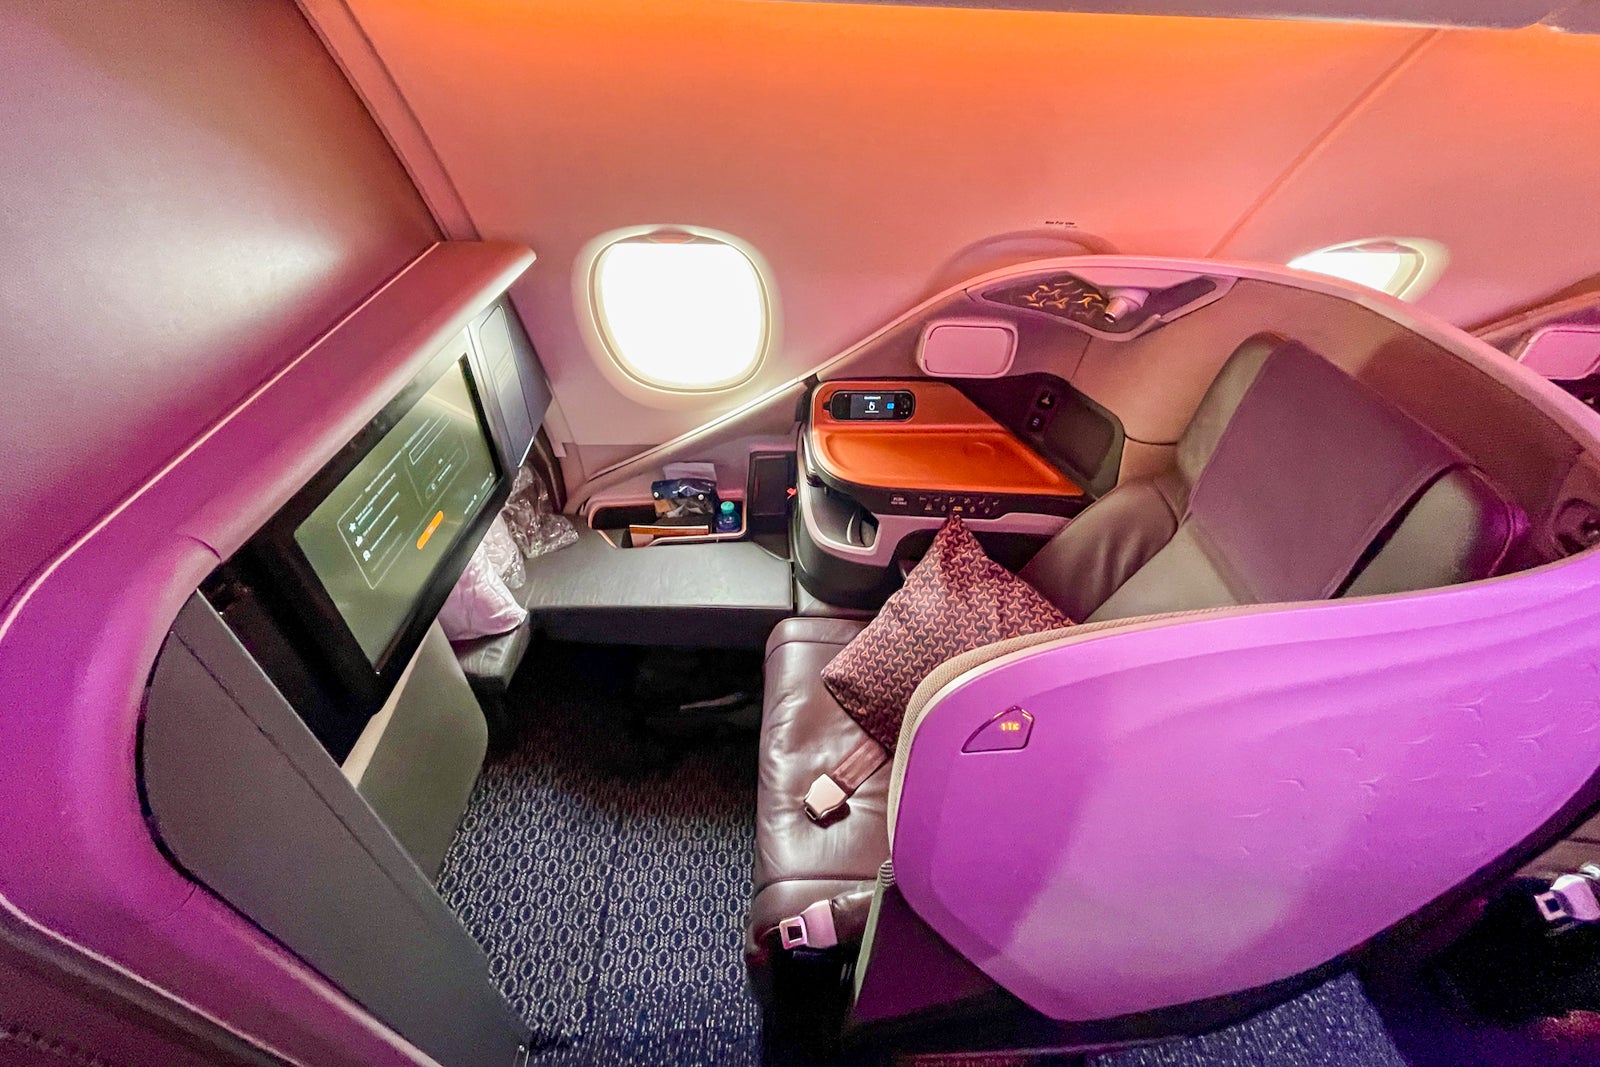 Singapore Airlines business class seat on the Airbus A380